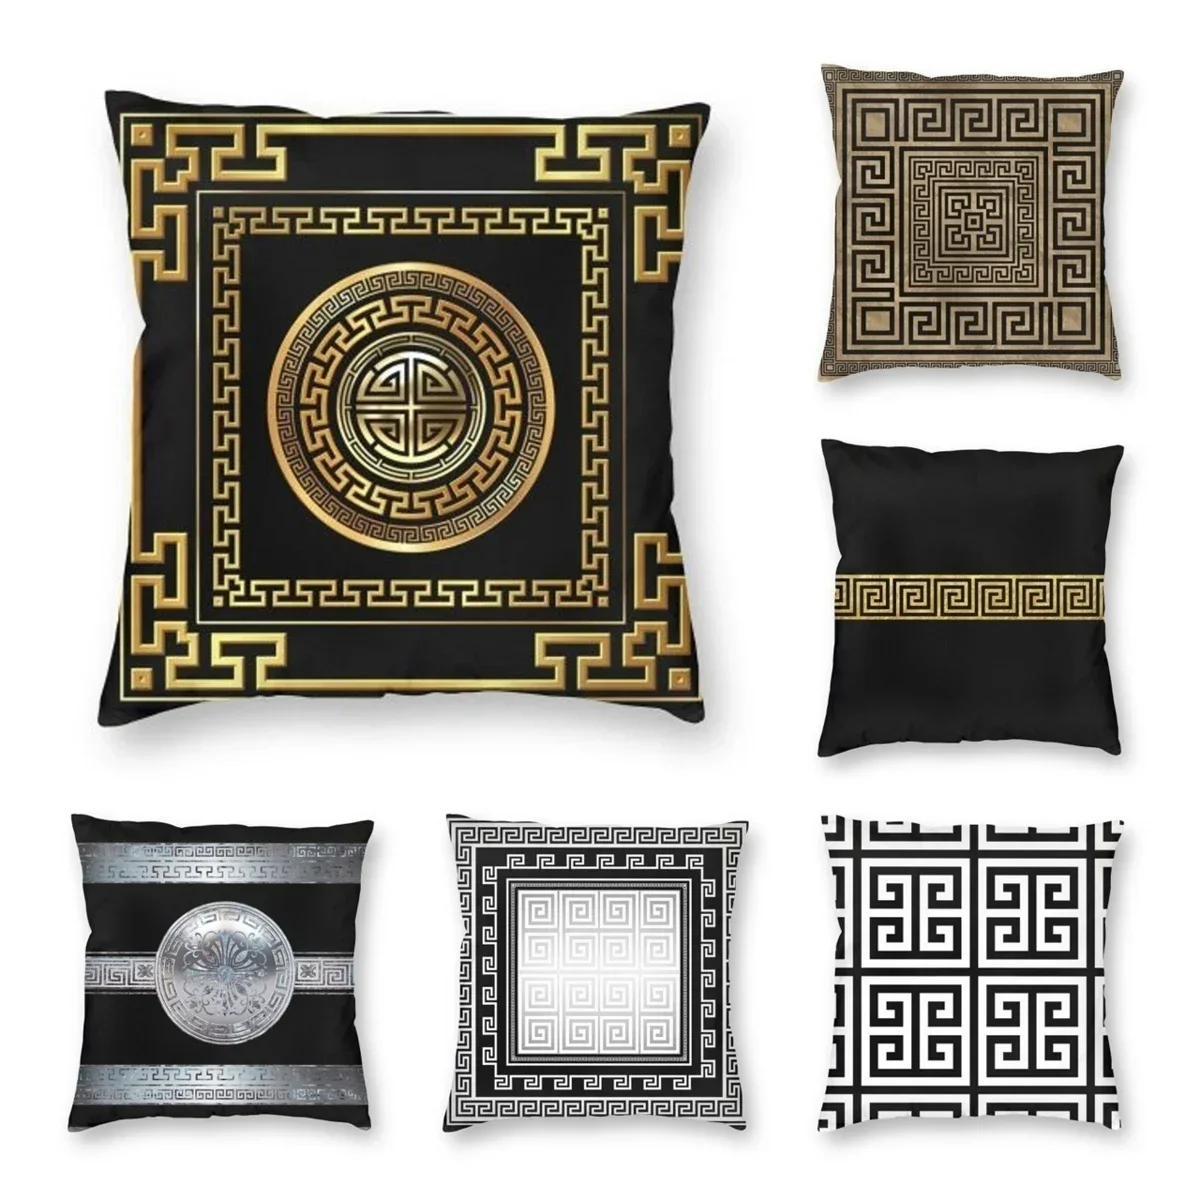 

Greek Key Meander Black Gold Large Pillowcase Soft Cushion Cover Decoration Throw Pillow Case Cover Home Square 45X45cm